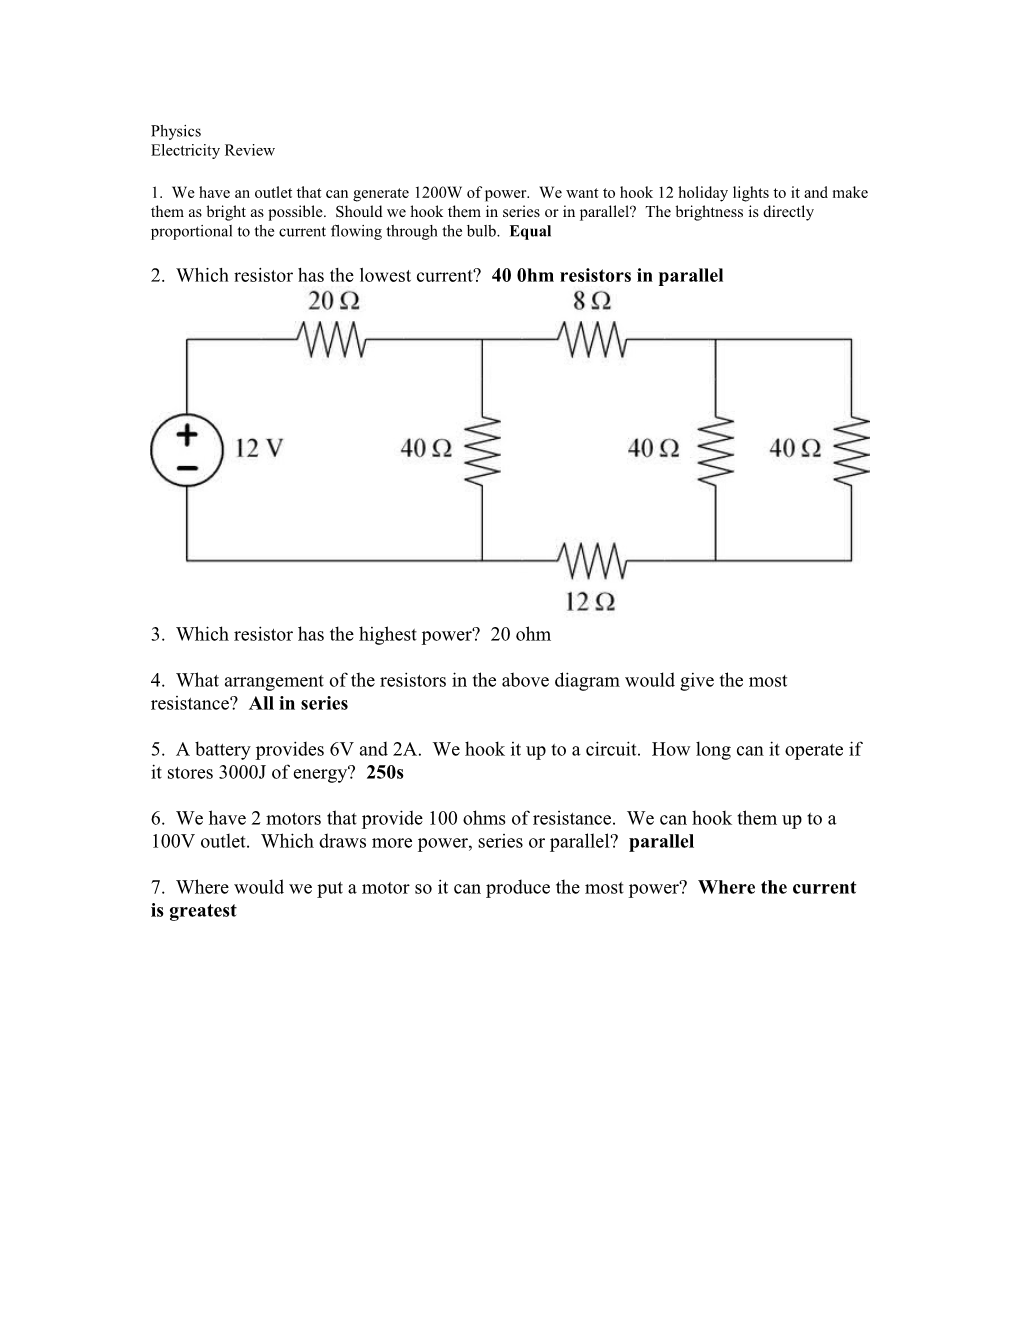 2. Which Resistor Has the Lowest Current? 40 0Hm Resistors in Parallel